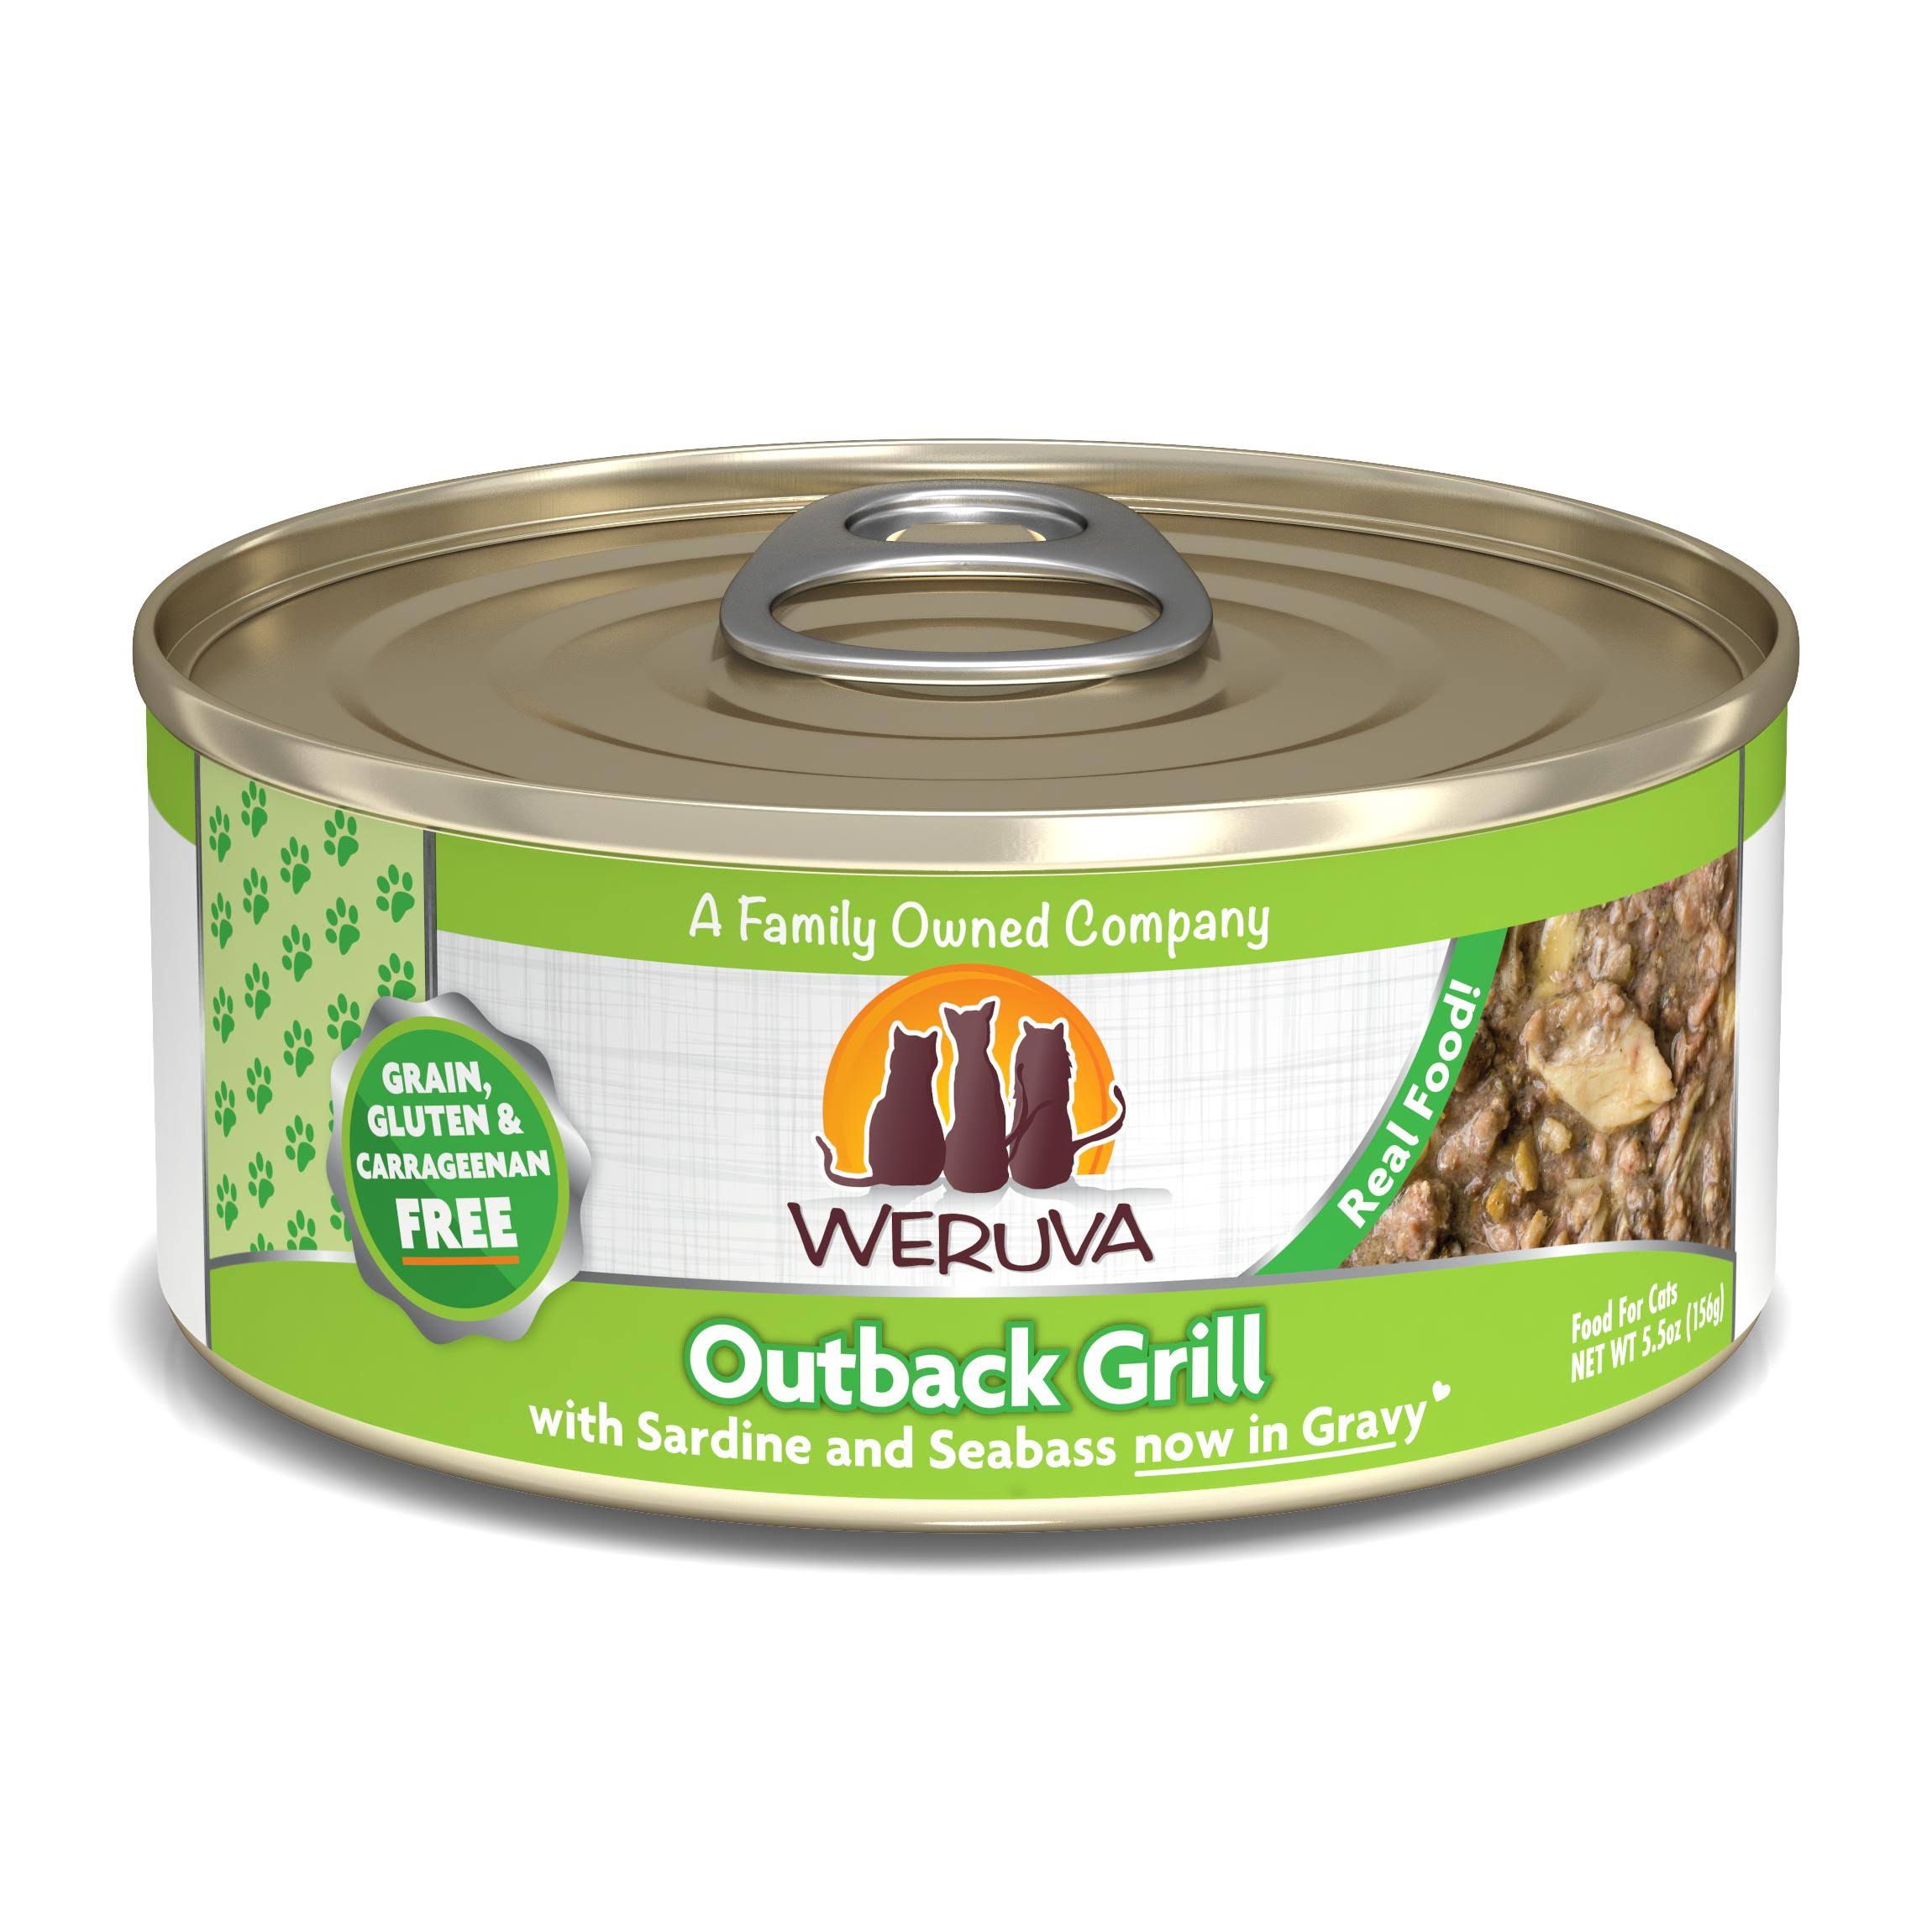 Weruva Canned Cat Food - Outback Grill 5.5 oz